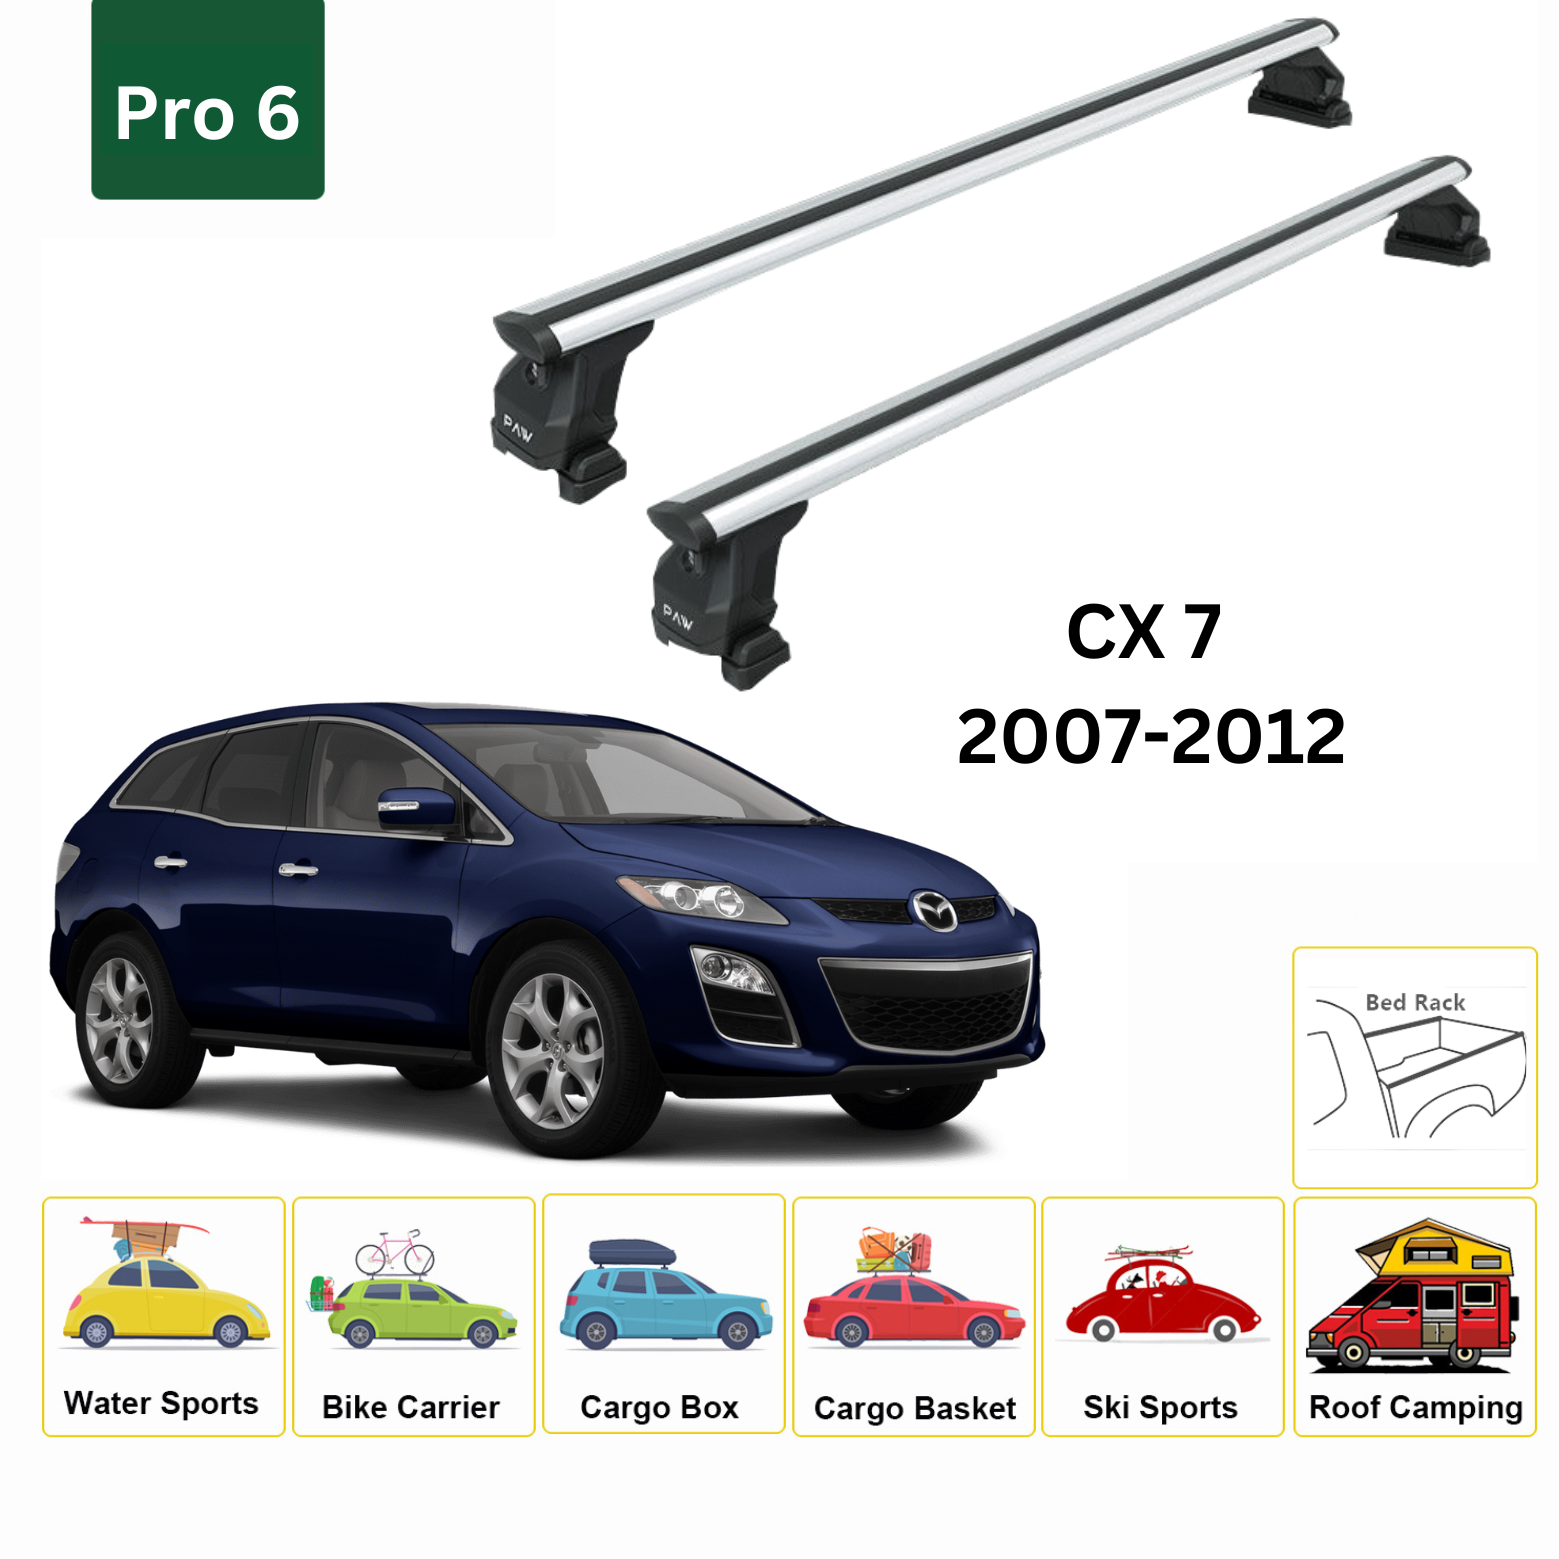 For Mazda CX-7 2007-12 Roof Rack Cross Bars Fix Point Pro 6 Silver - 0